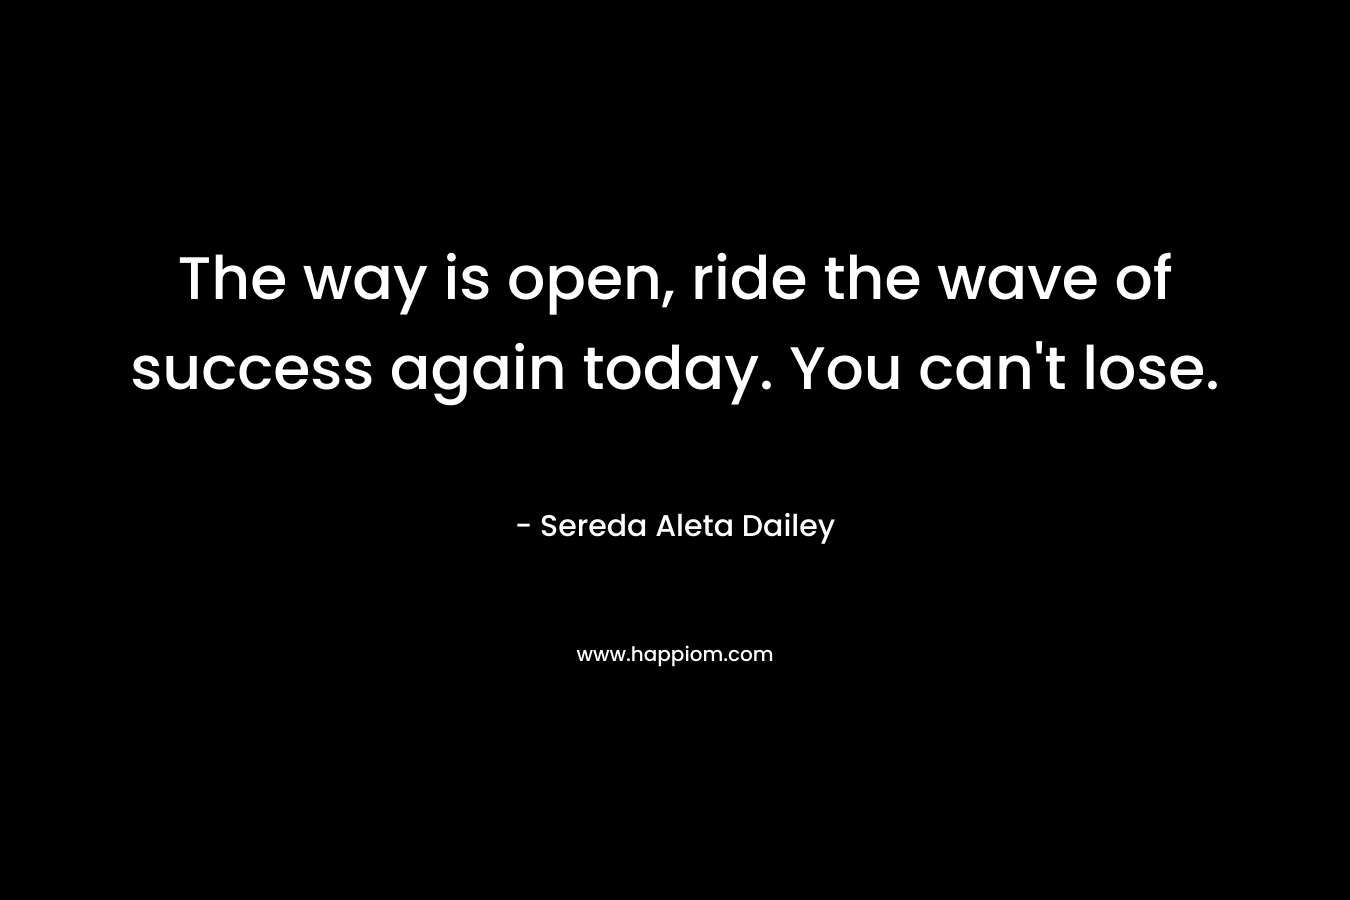 The way is open, ride the wave of success again today. You can’t lose. – Sereda Aleta Dailey